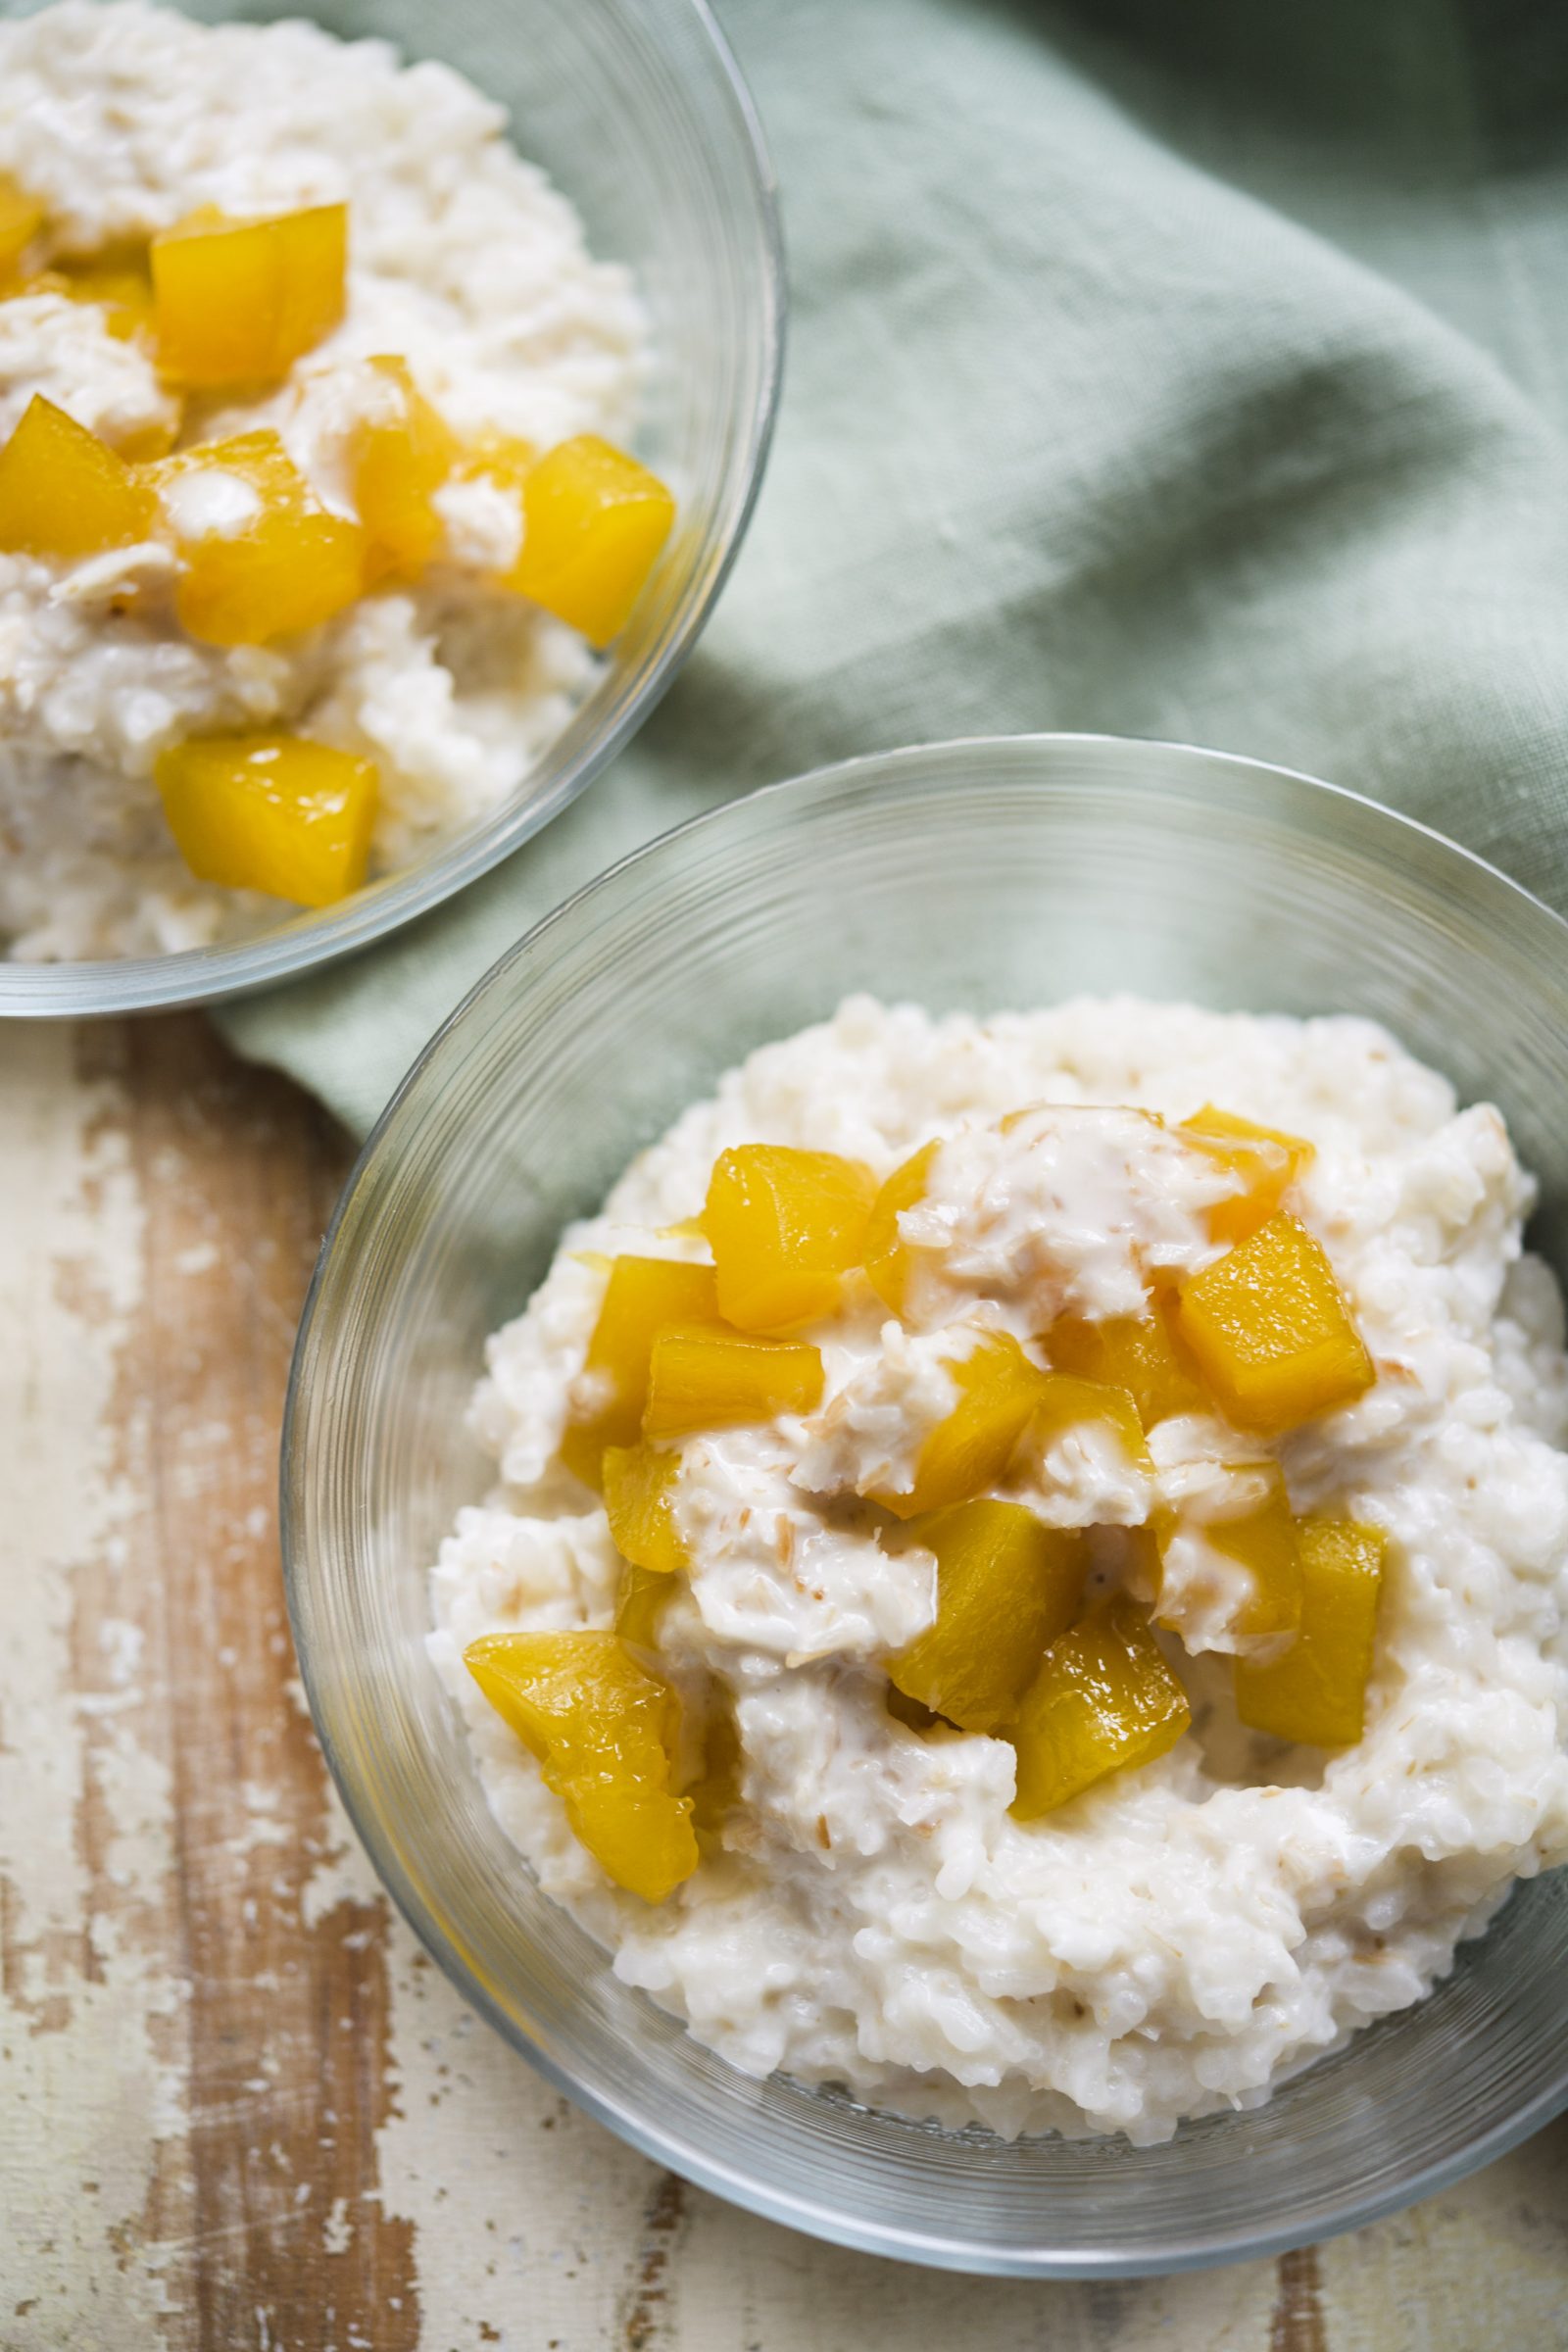 Senegalese Mango And Coconut Rice Pudding Christopher Kimball S Milk Street,Peach Schnapps